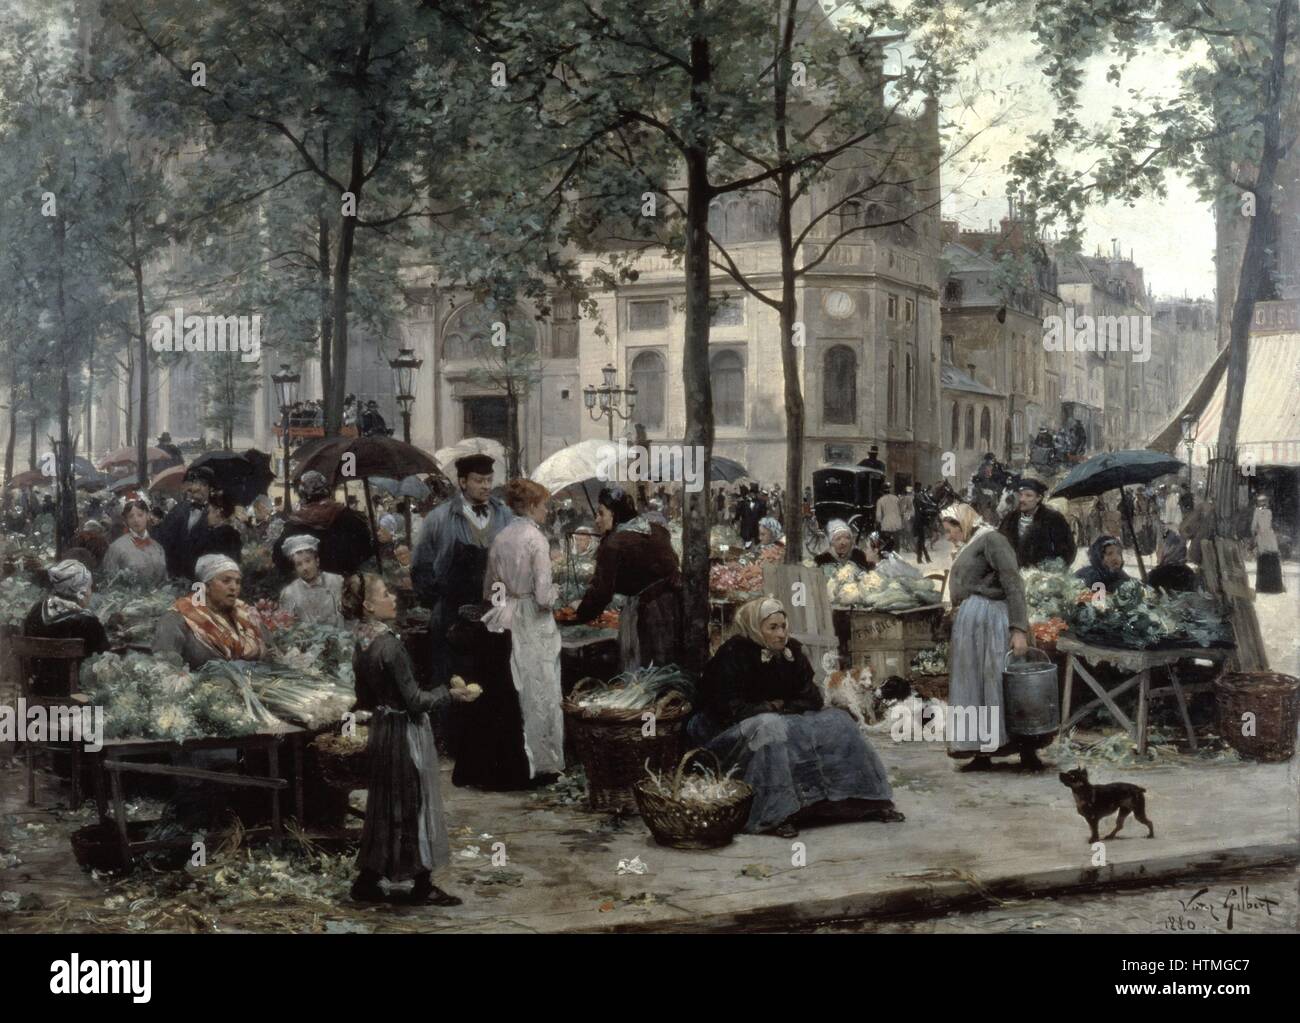 The Square in Front of Les Halles: 1880. Market women at their vegetable stalls. Victor Gabriel Gilbert (1847-1935) French Academic painter. Les Halles' was for centuries the food market of Paris, but was moved out to Rungis in 1969. Stock Photo